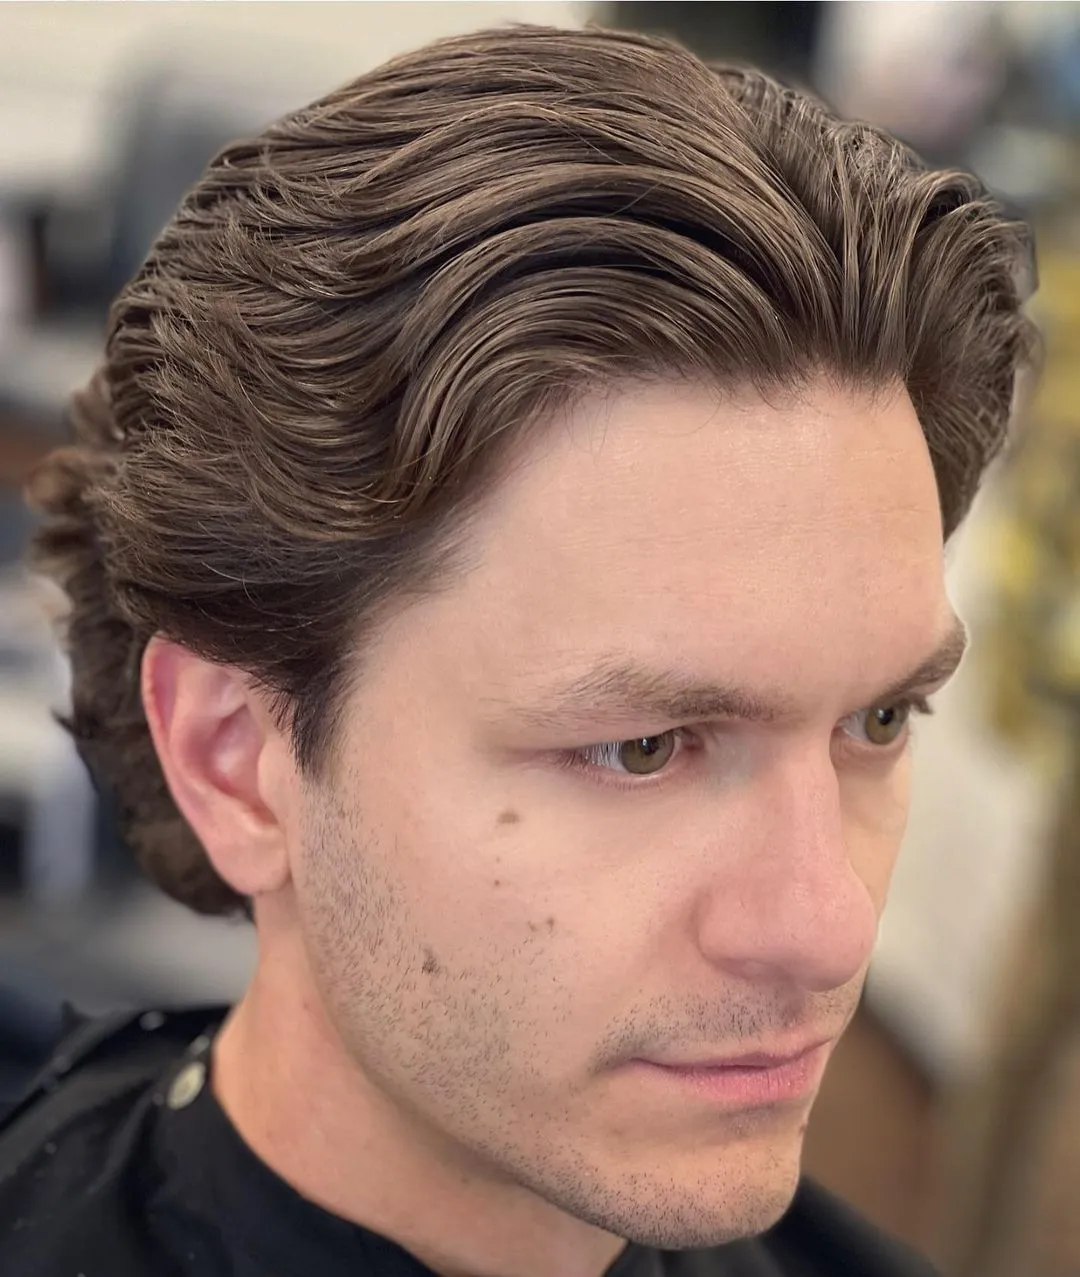 flow with blended hair